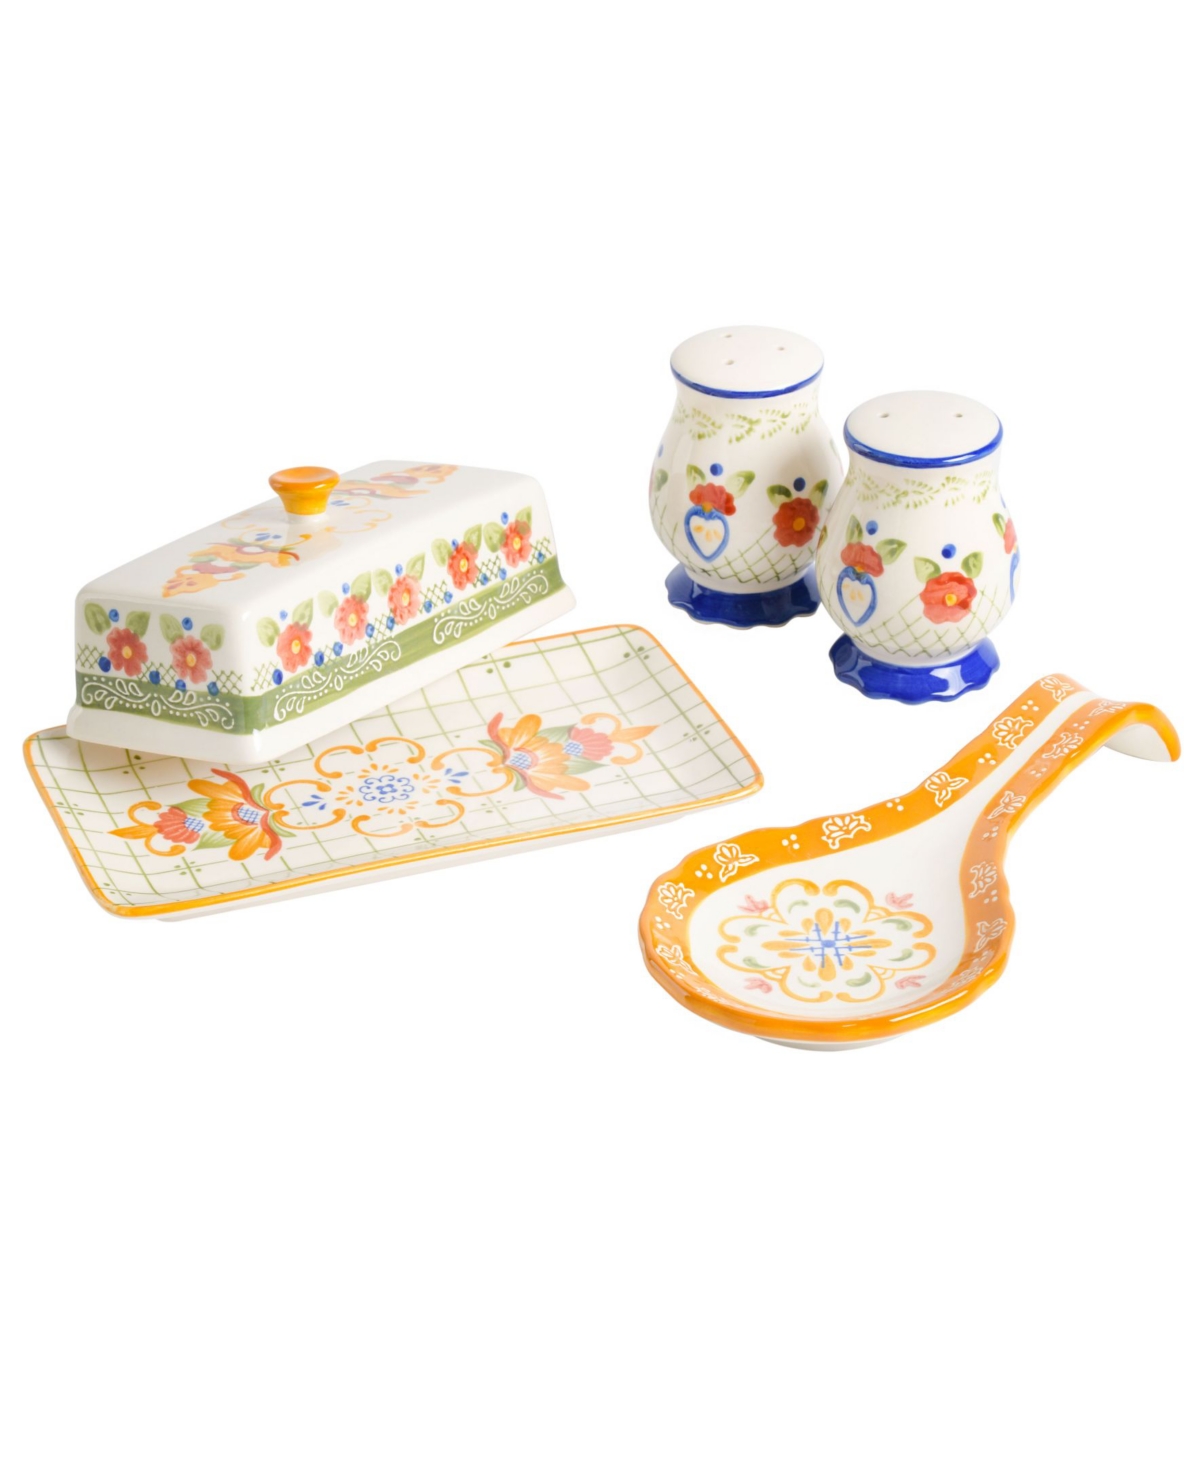 LAURIE GATES TIERRA HAND PAINTED ACCESSORY SET, 4 PIECE